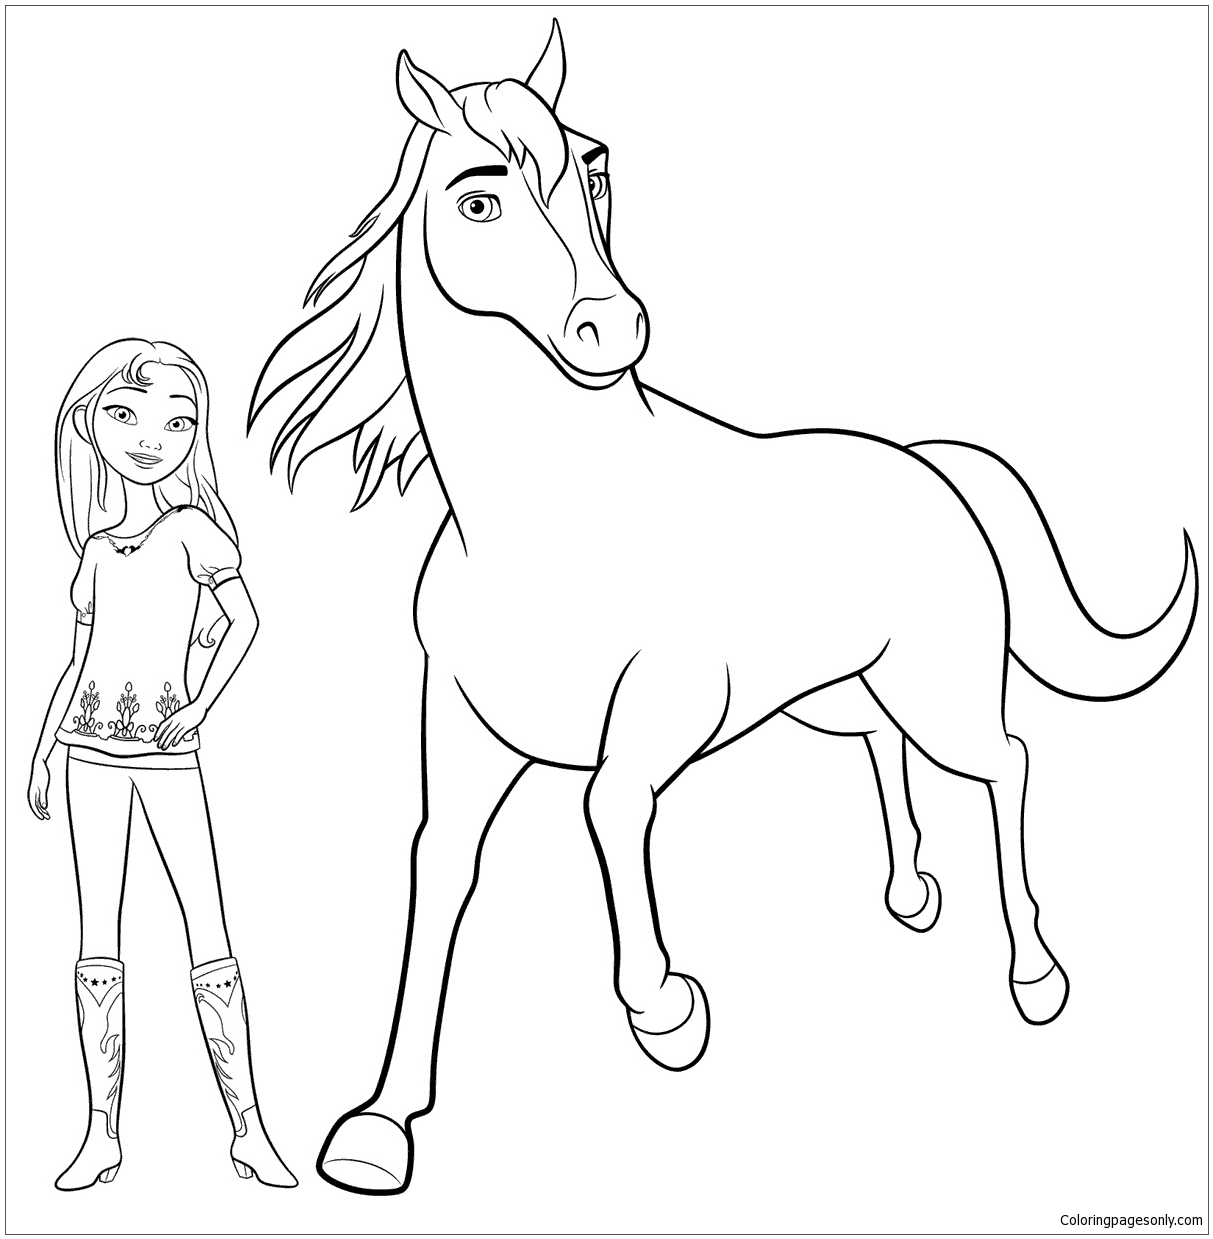 Horse and Girl from Horse